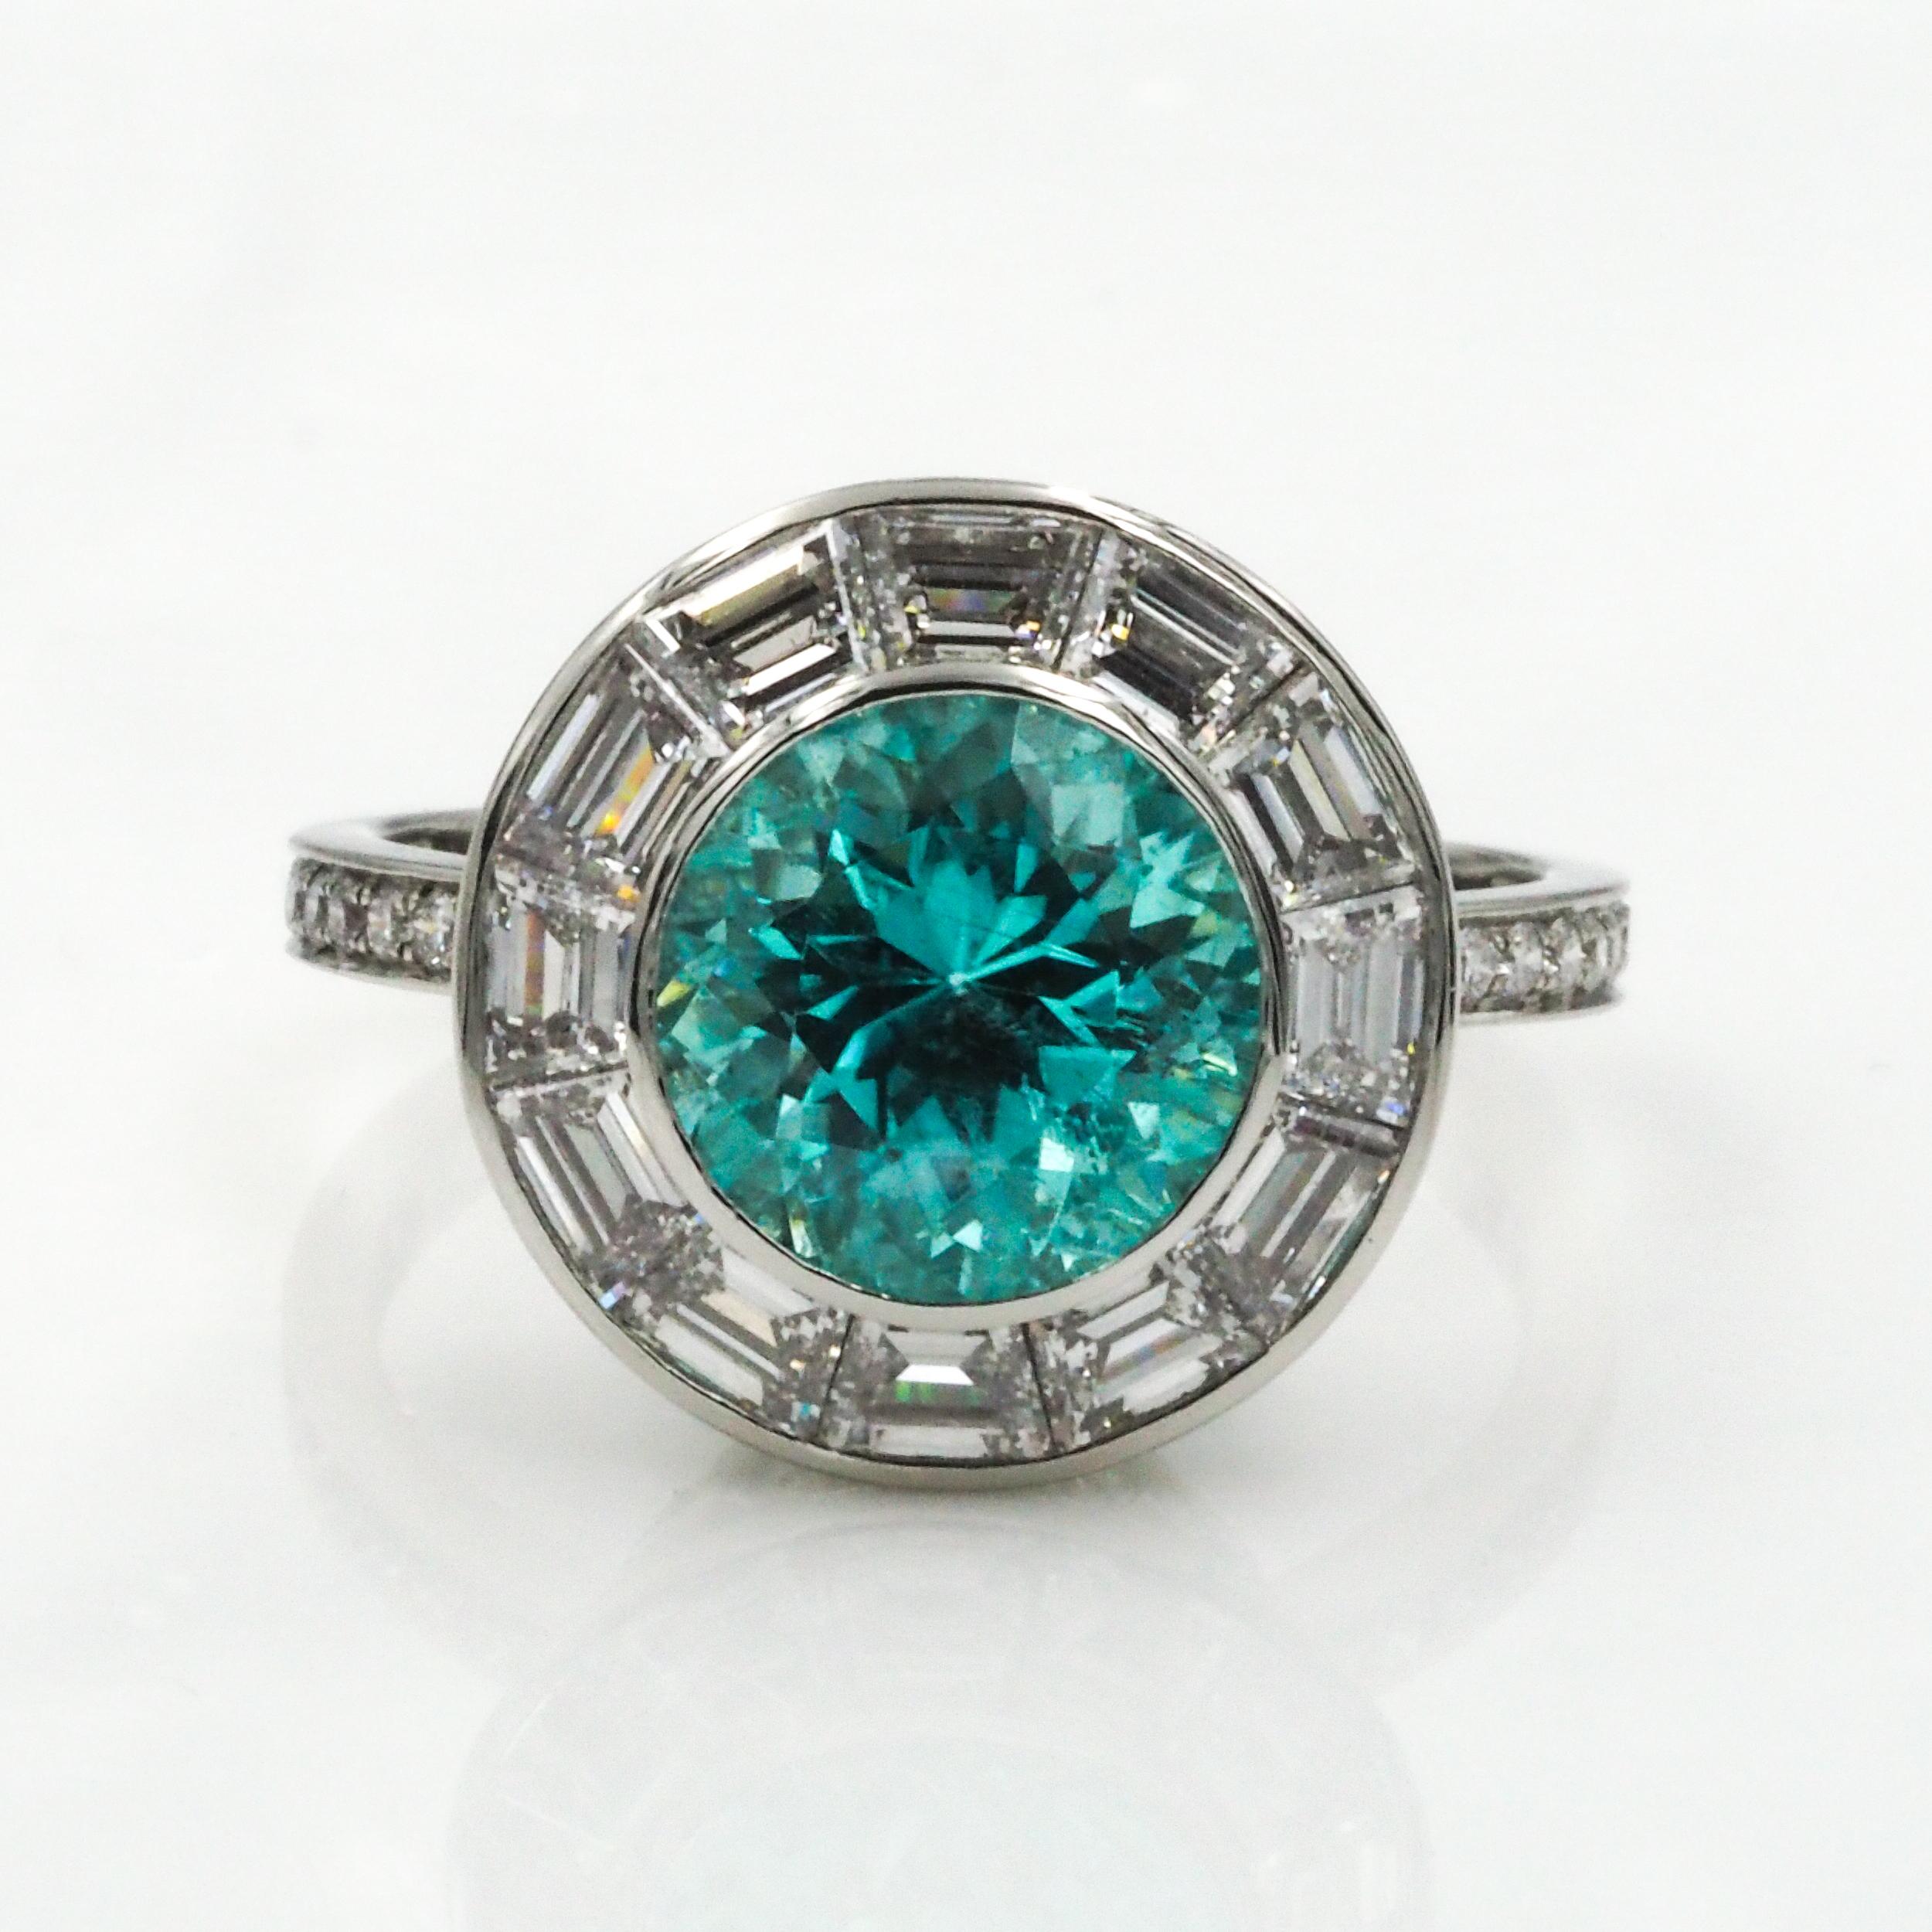 An original creation by Cicada Jewelry. This platinum cocktail ring features a beautiful round paraiba tourmaline, surrounded by baguette diamonds. The basket is finished with marquise diamonds, and the shank with melee diamonds.

Paraiba: